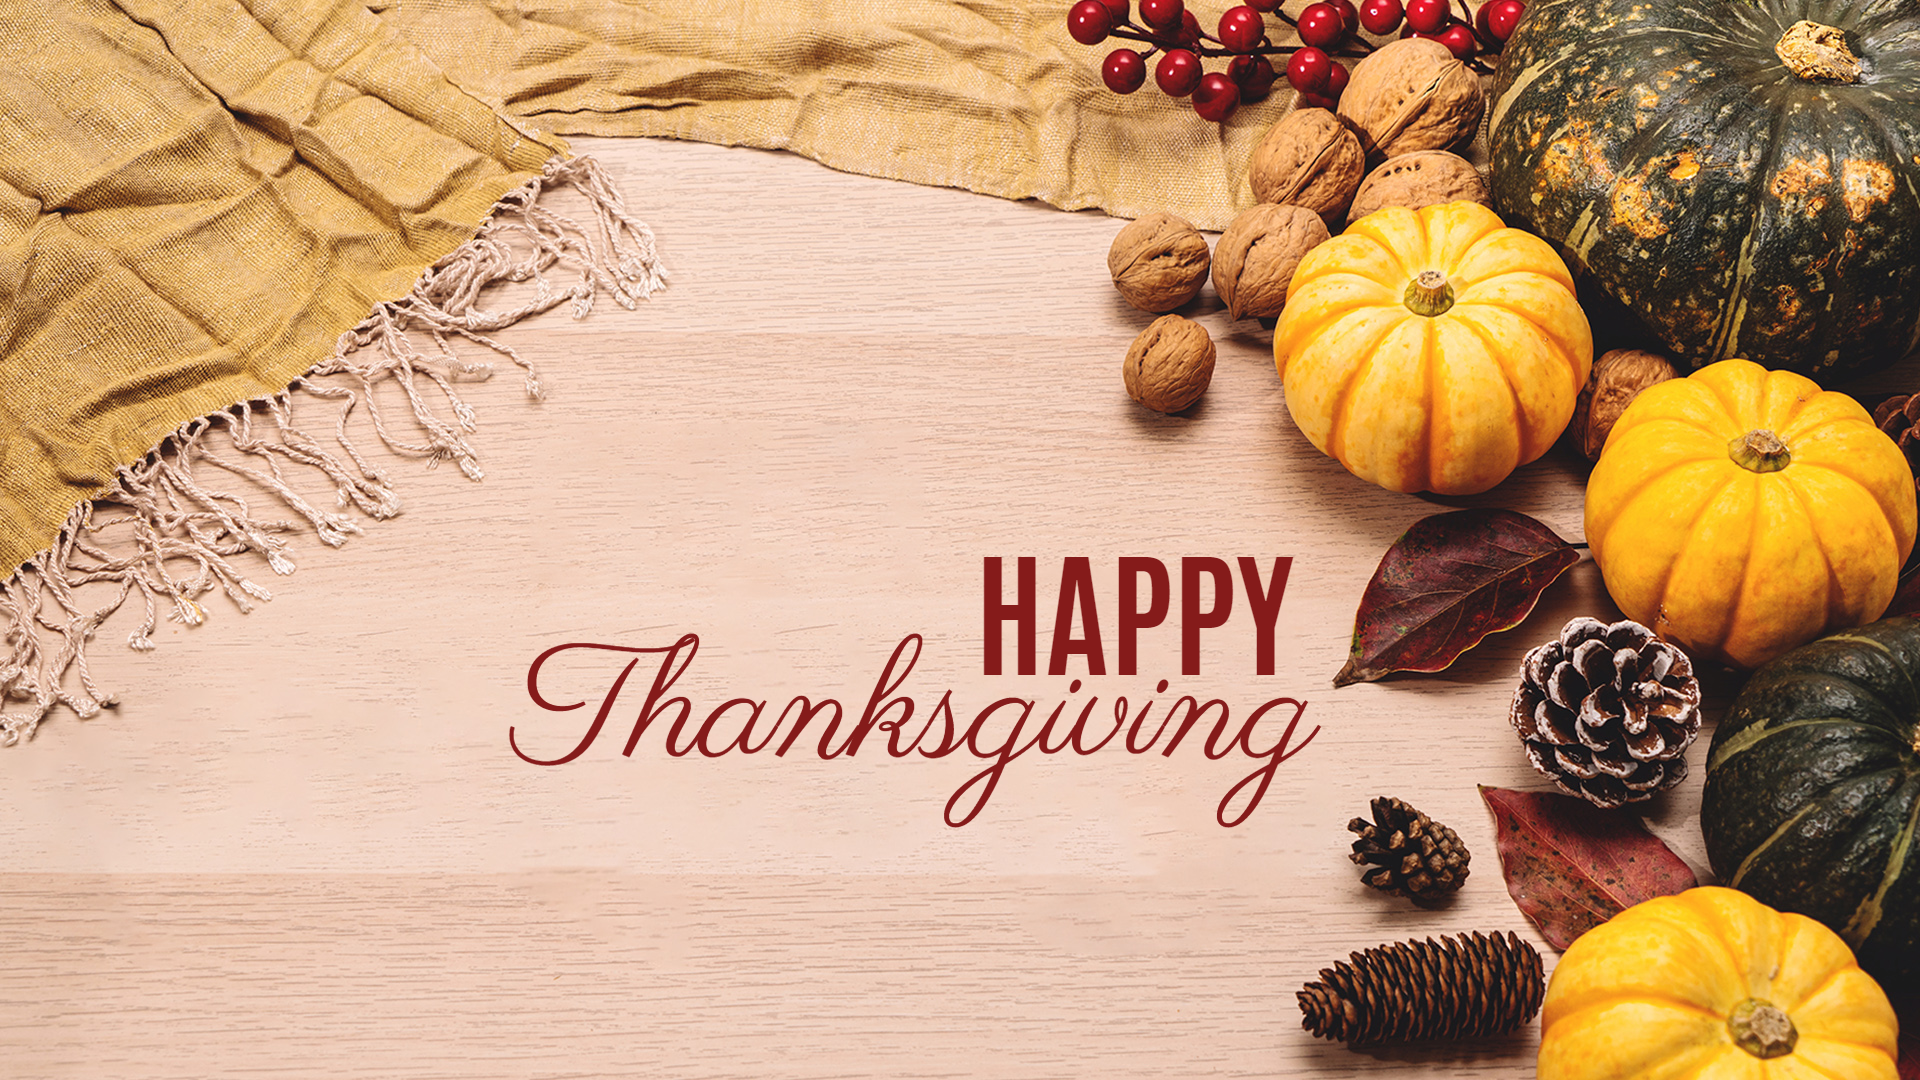 Happy Thanksgiving Pictures & HD Images | Thanksgiving Greetings